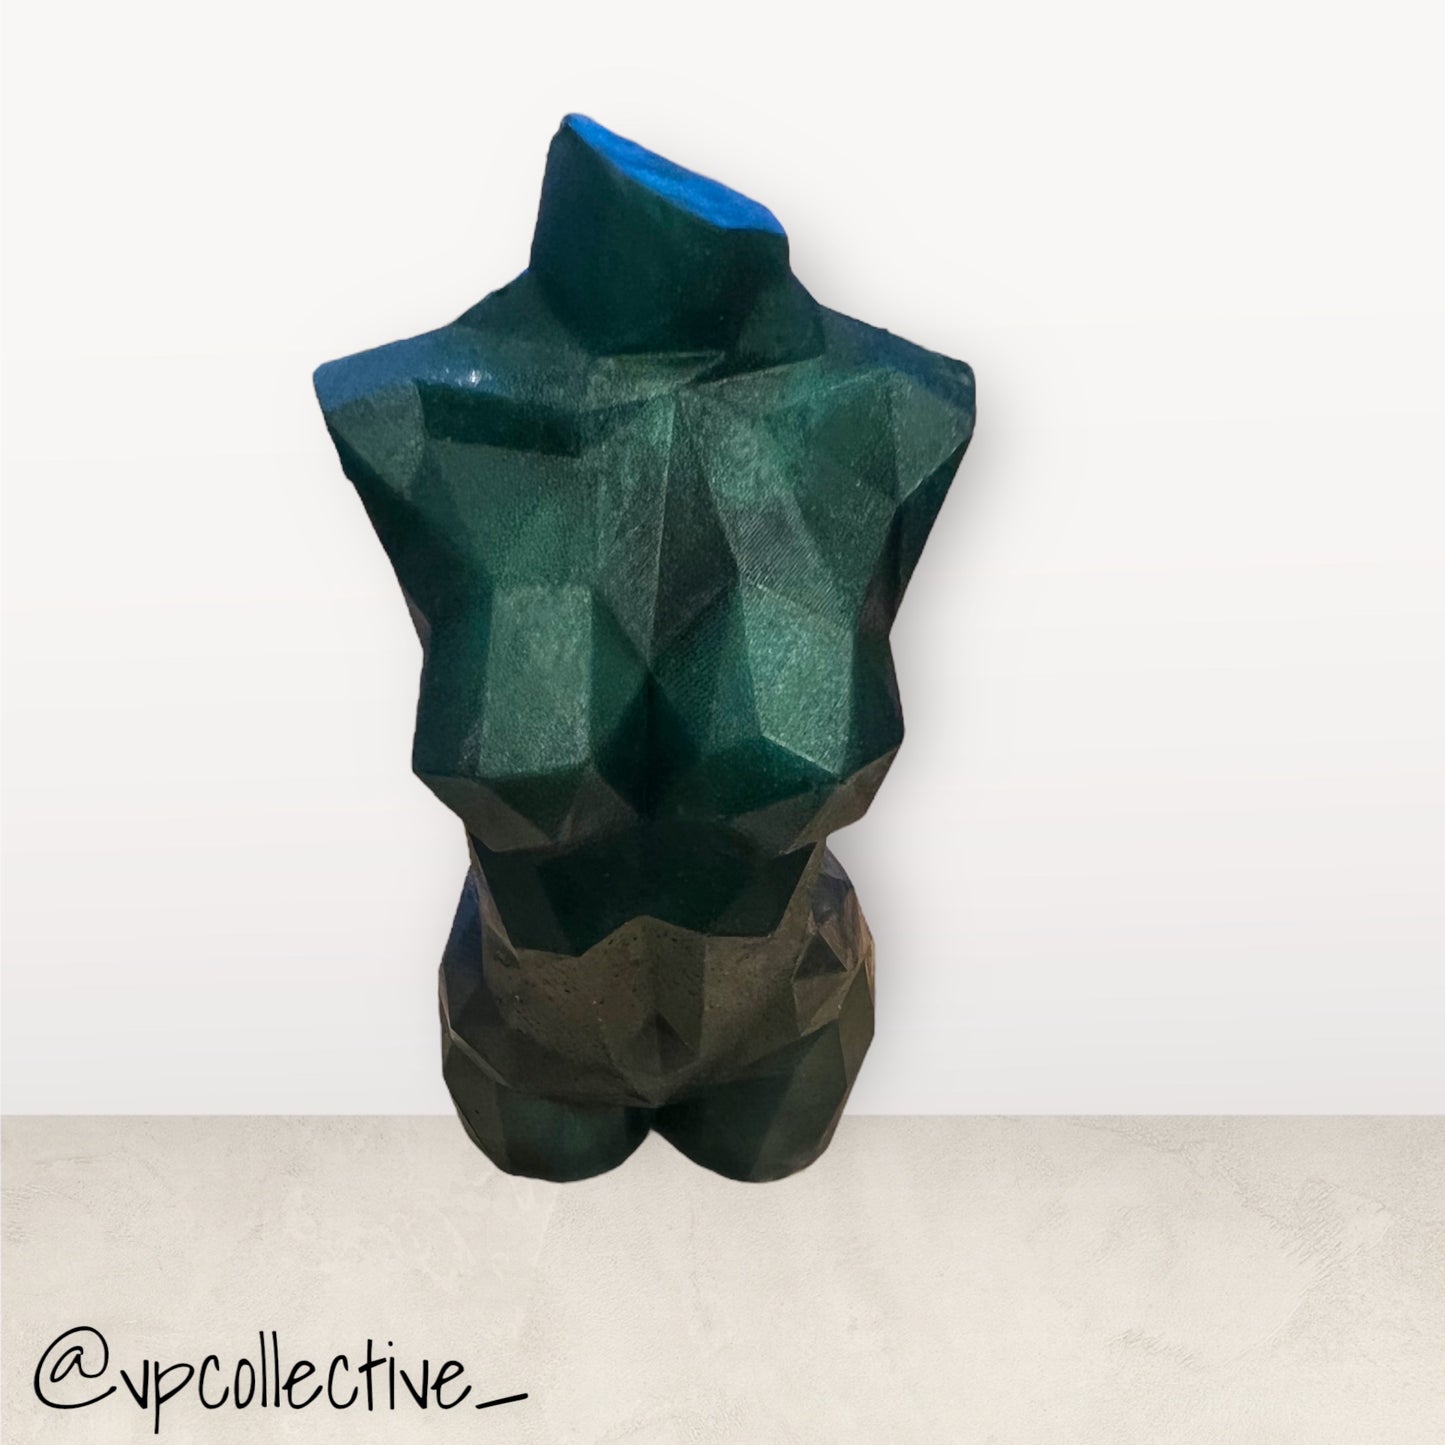 Exquisite Emerald Faceted Goddess Bust